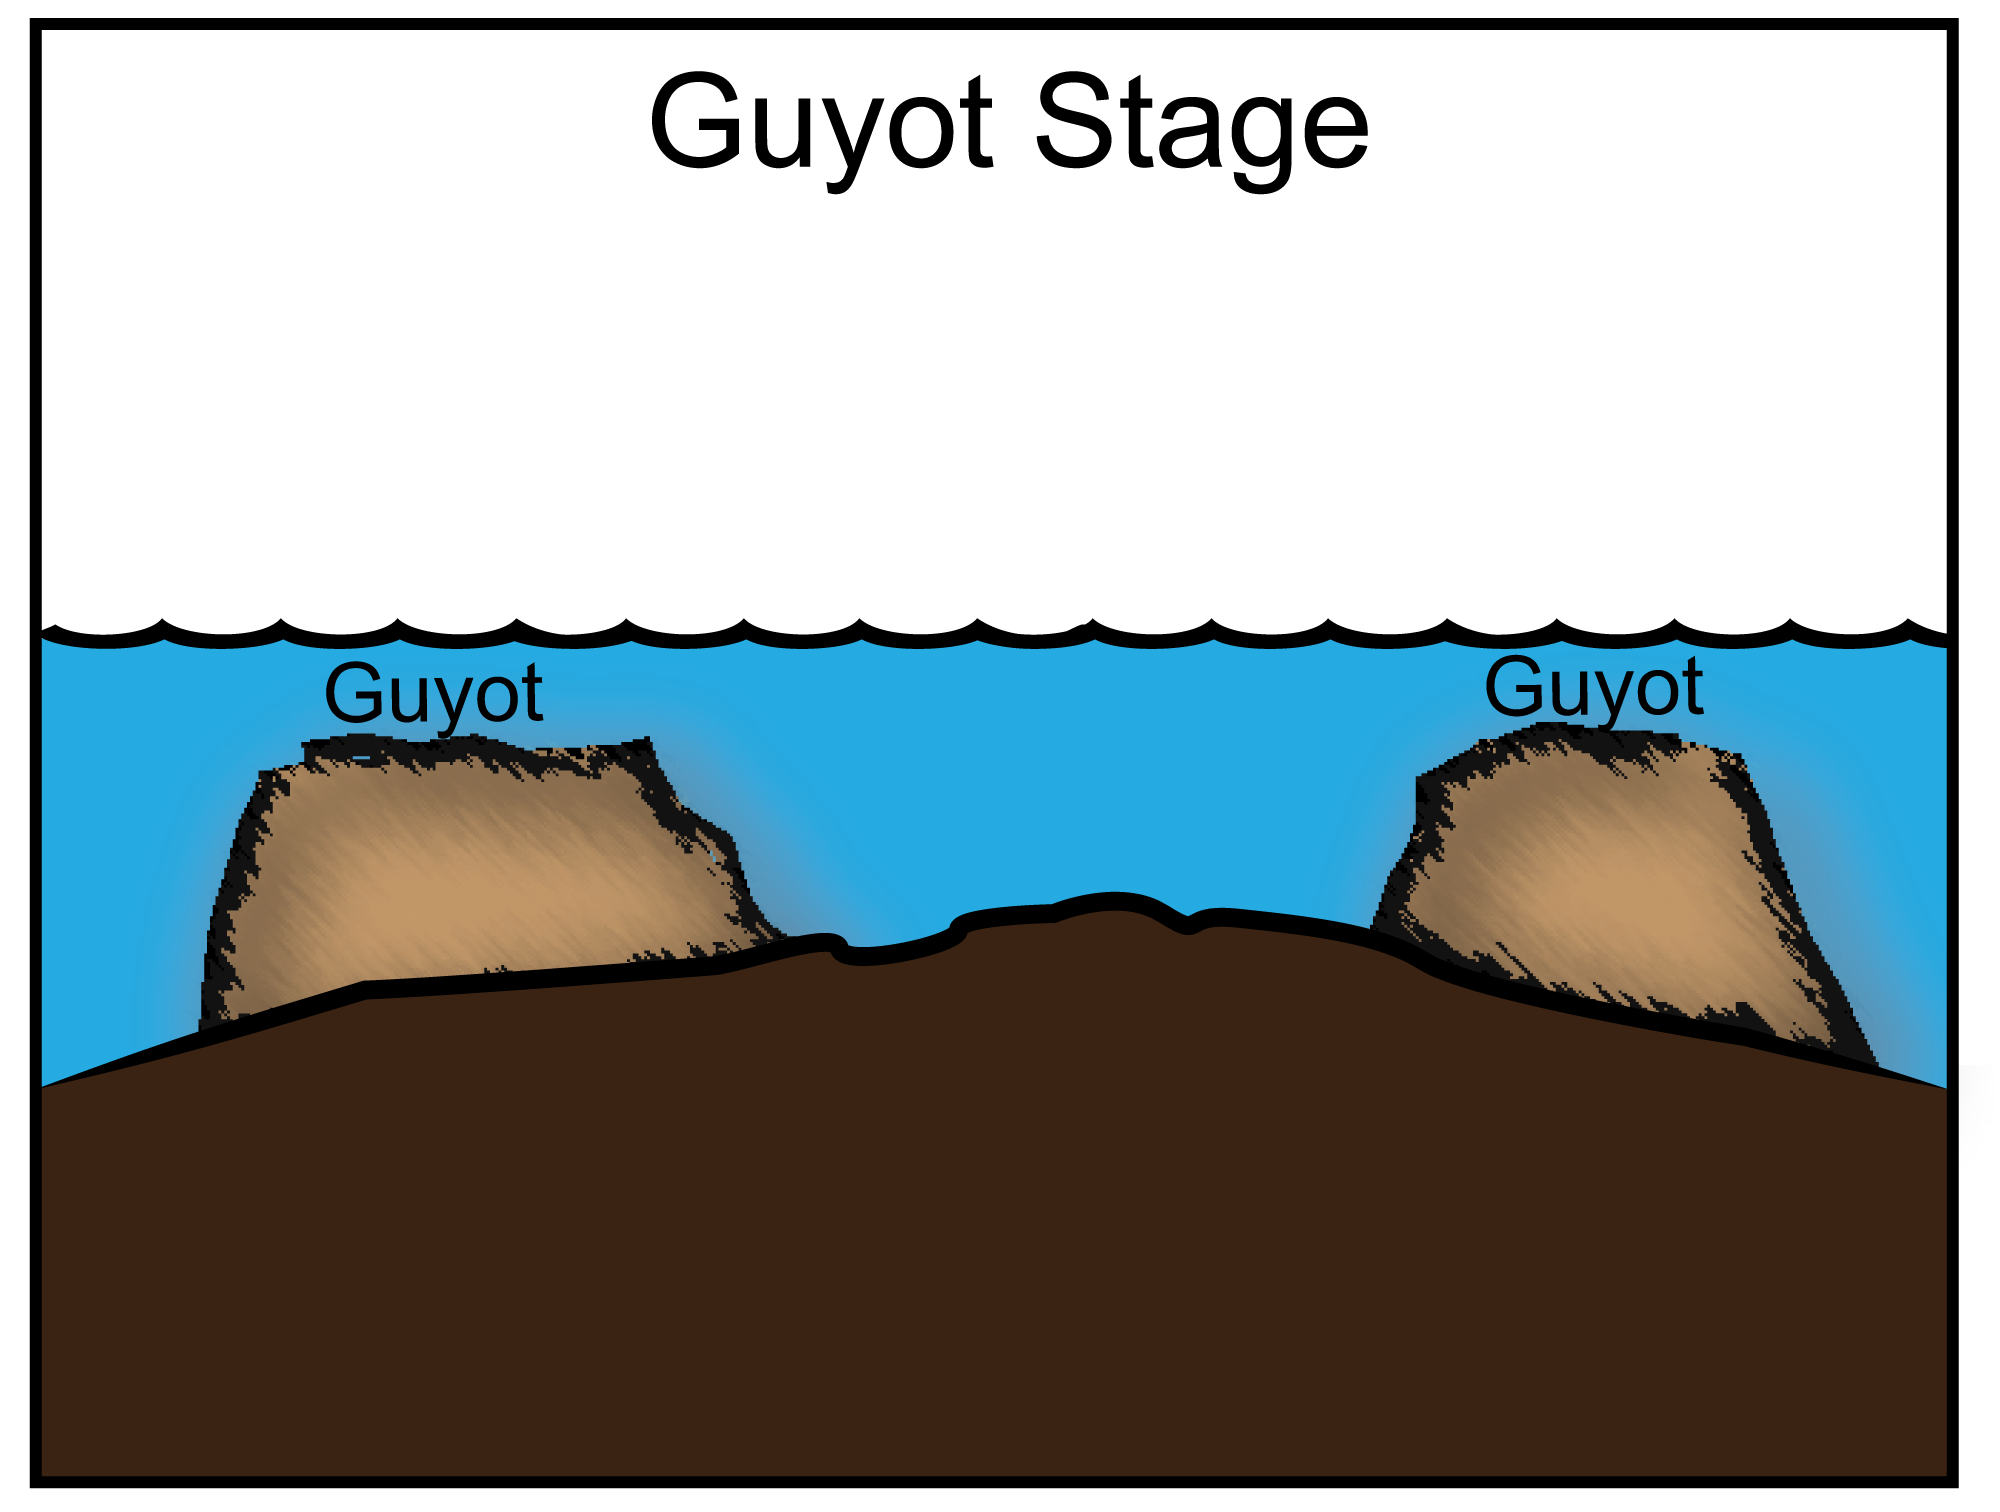 Diagram of the guyot stage of the volcanic island life cycle. In this image, the heavily eroded volcano is completed submerged, and the coral reefs are drowned. The volcano is now a flat-topped seamount.